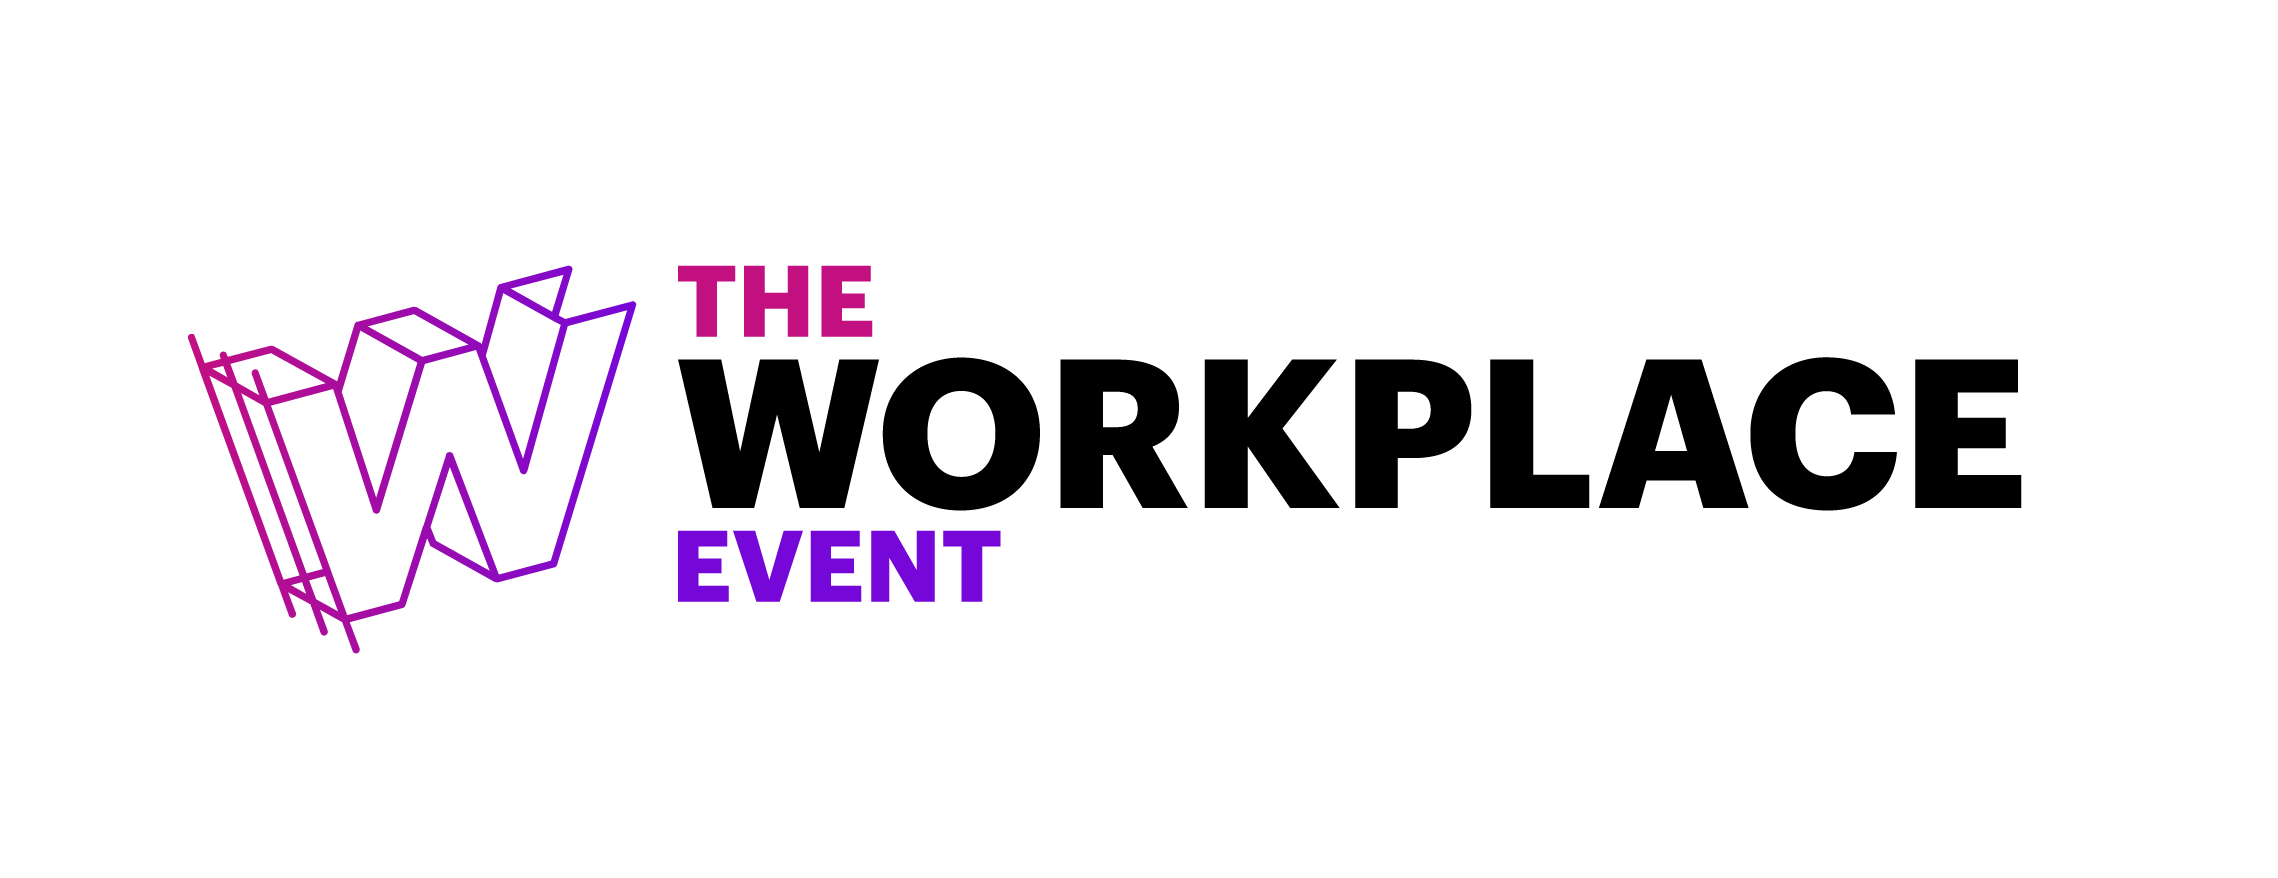 The Workplace Event logo